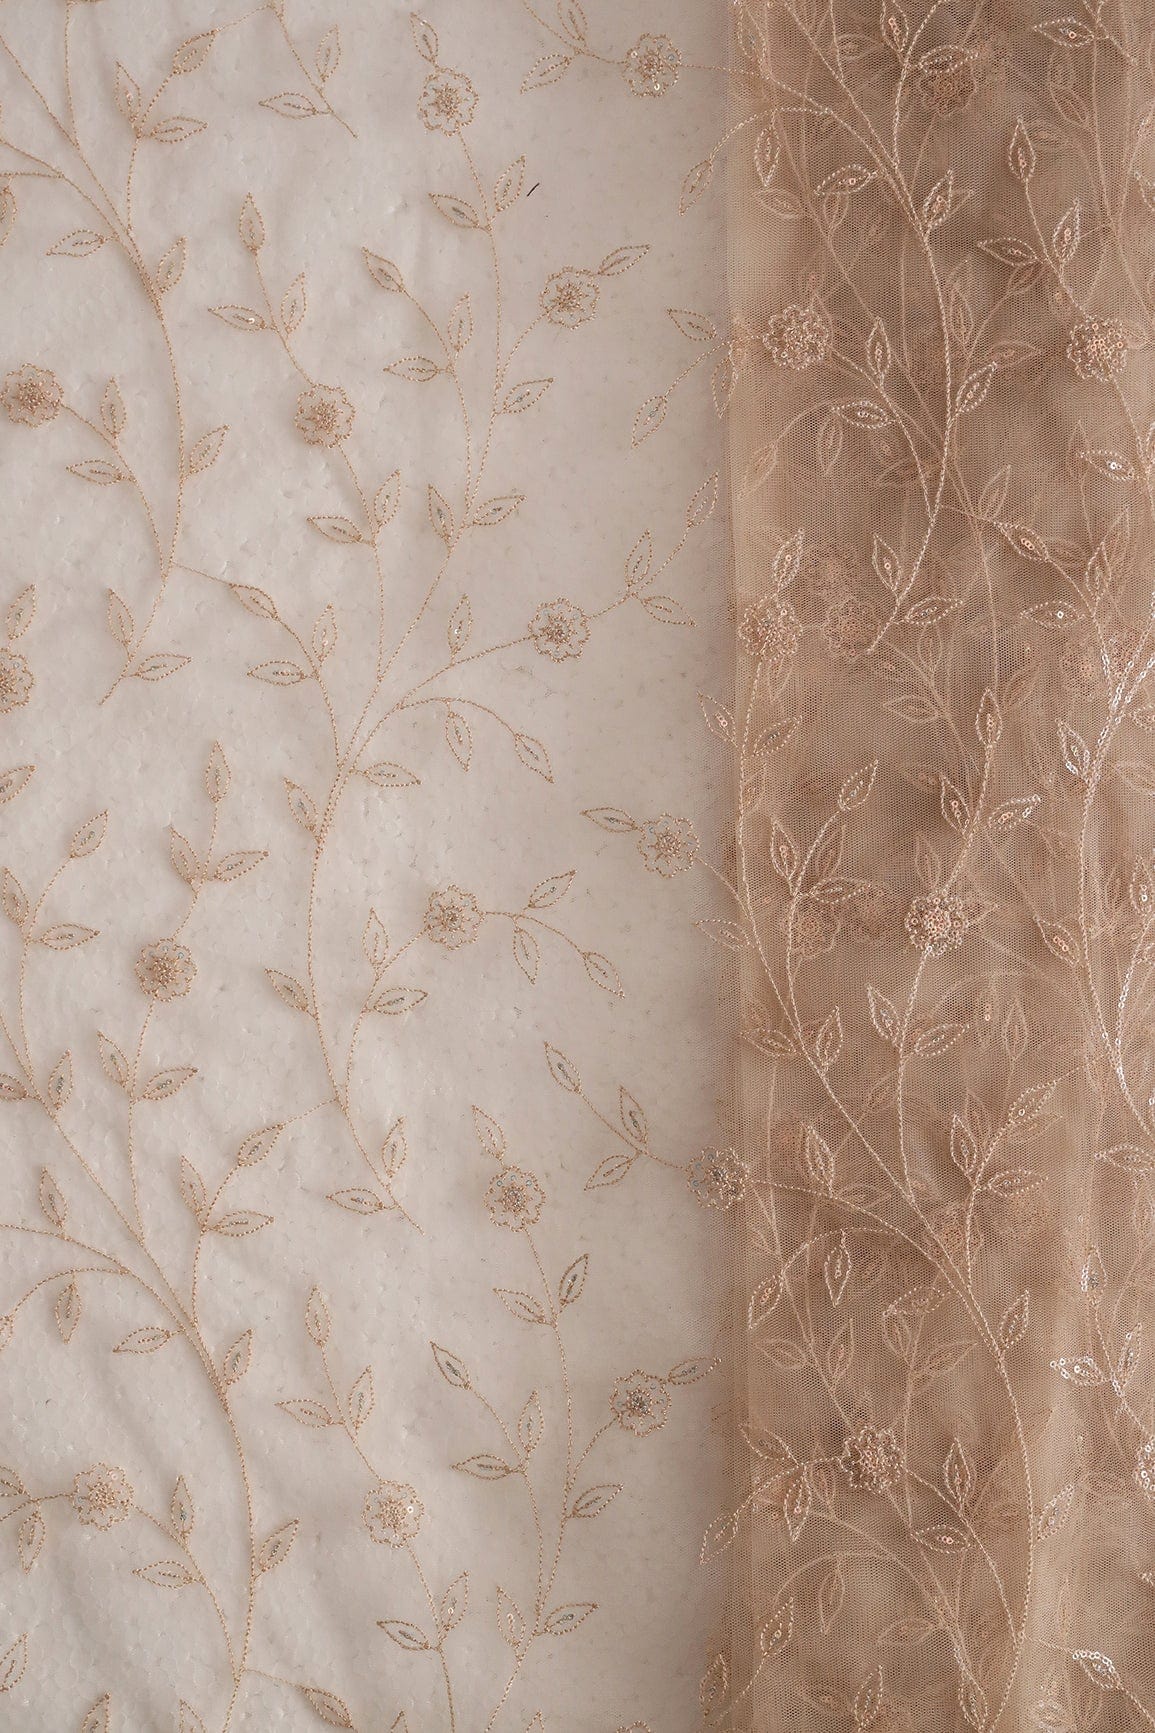 doeraa Embroidery Fabrics Beige Thread With Sequins Beautiful Leafy Floral Embroidery On Beige Soft Net Fabric